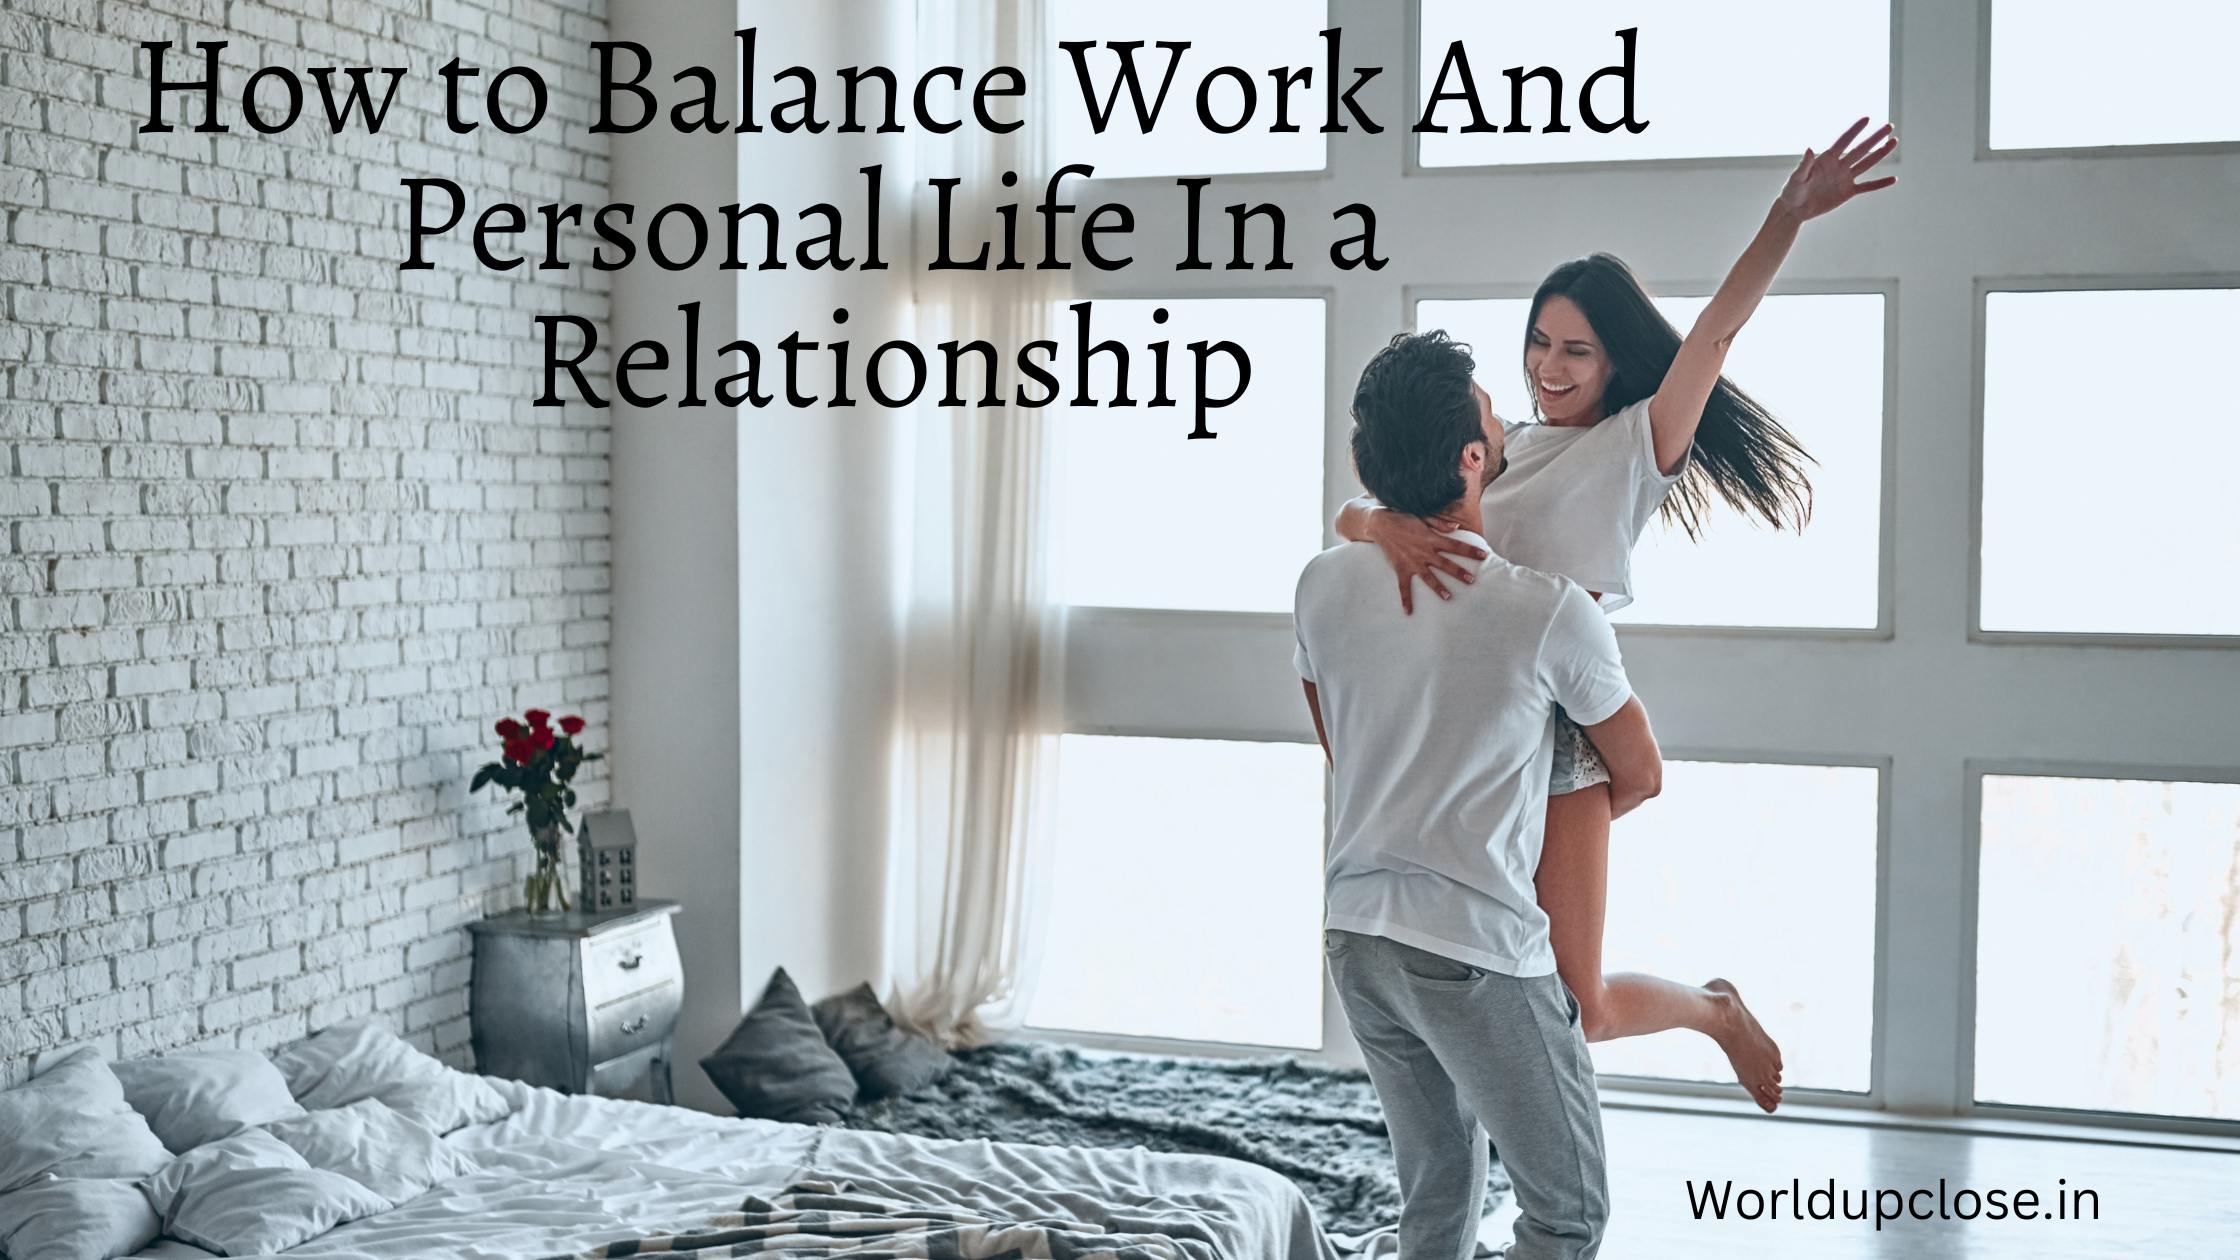 11 Ways to Balance Work and Personal Life in a Relationship 4